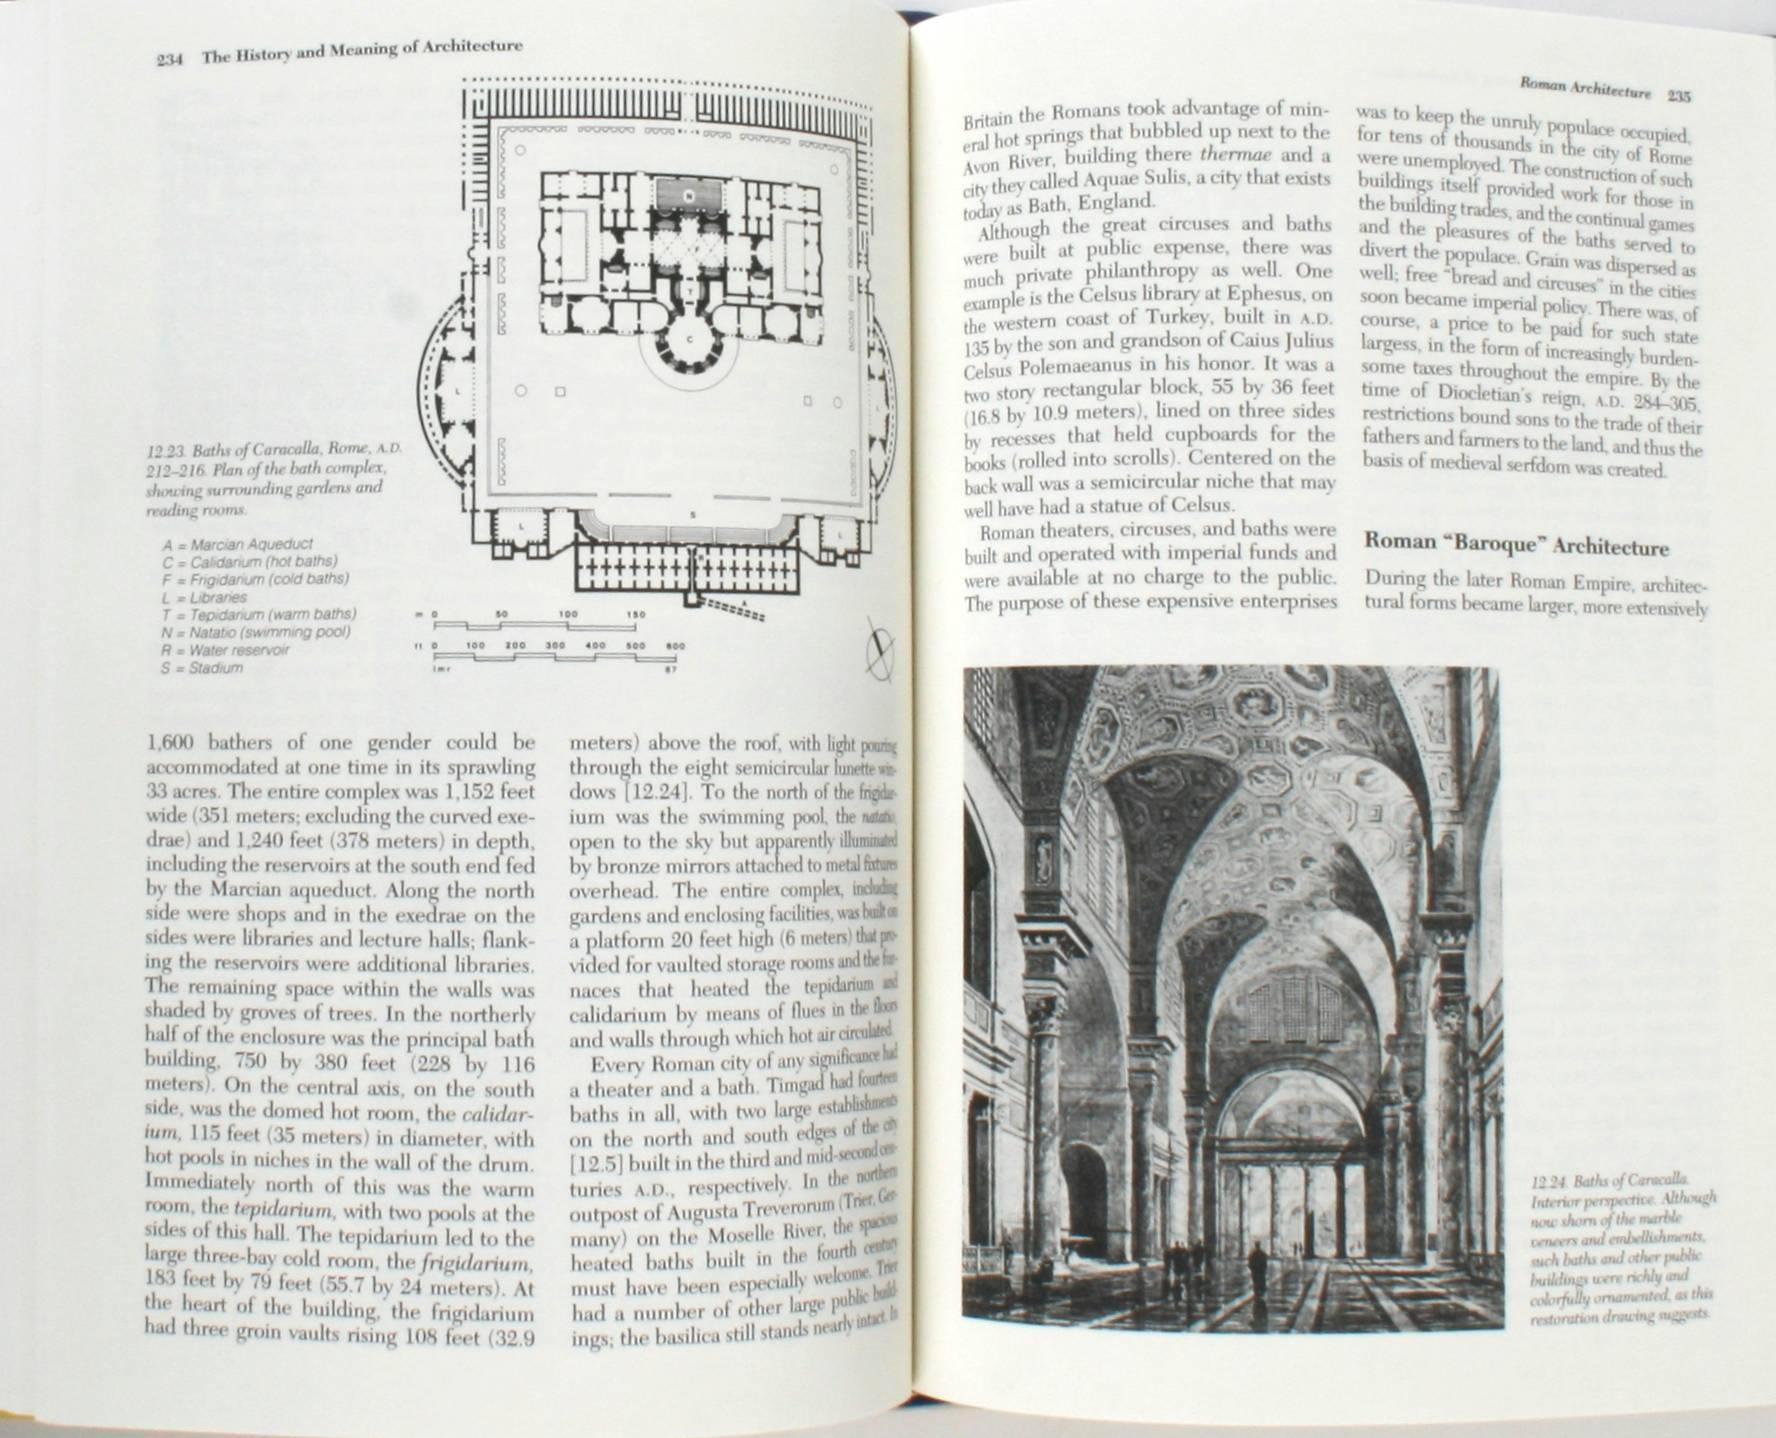 Understanding Architecture, It's Elements, History and Meaning by Leland M. Roth. New York: Harper Collins Publishers, 1993. Stated first edition hardcover with dust jacket. 542 pp. An illustrated survey of Western architecture that defines and